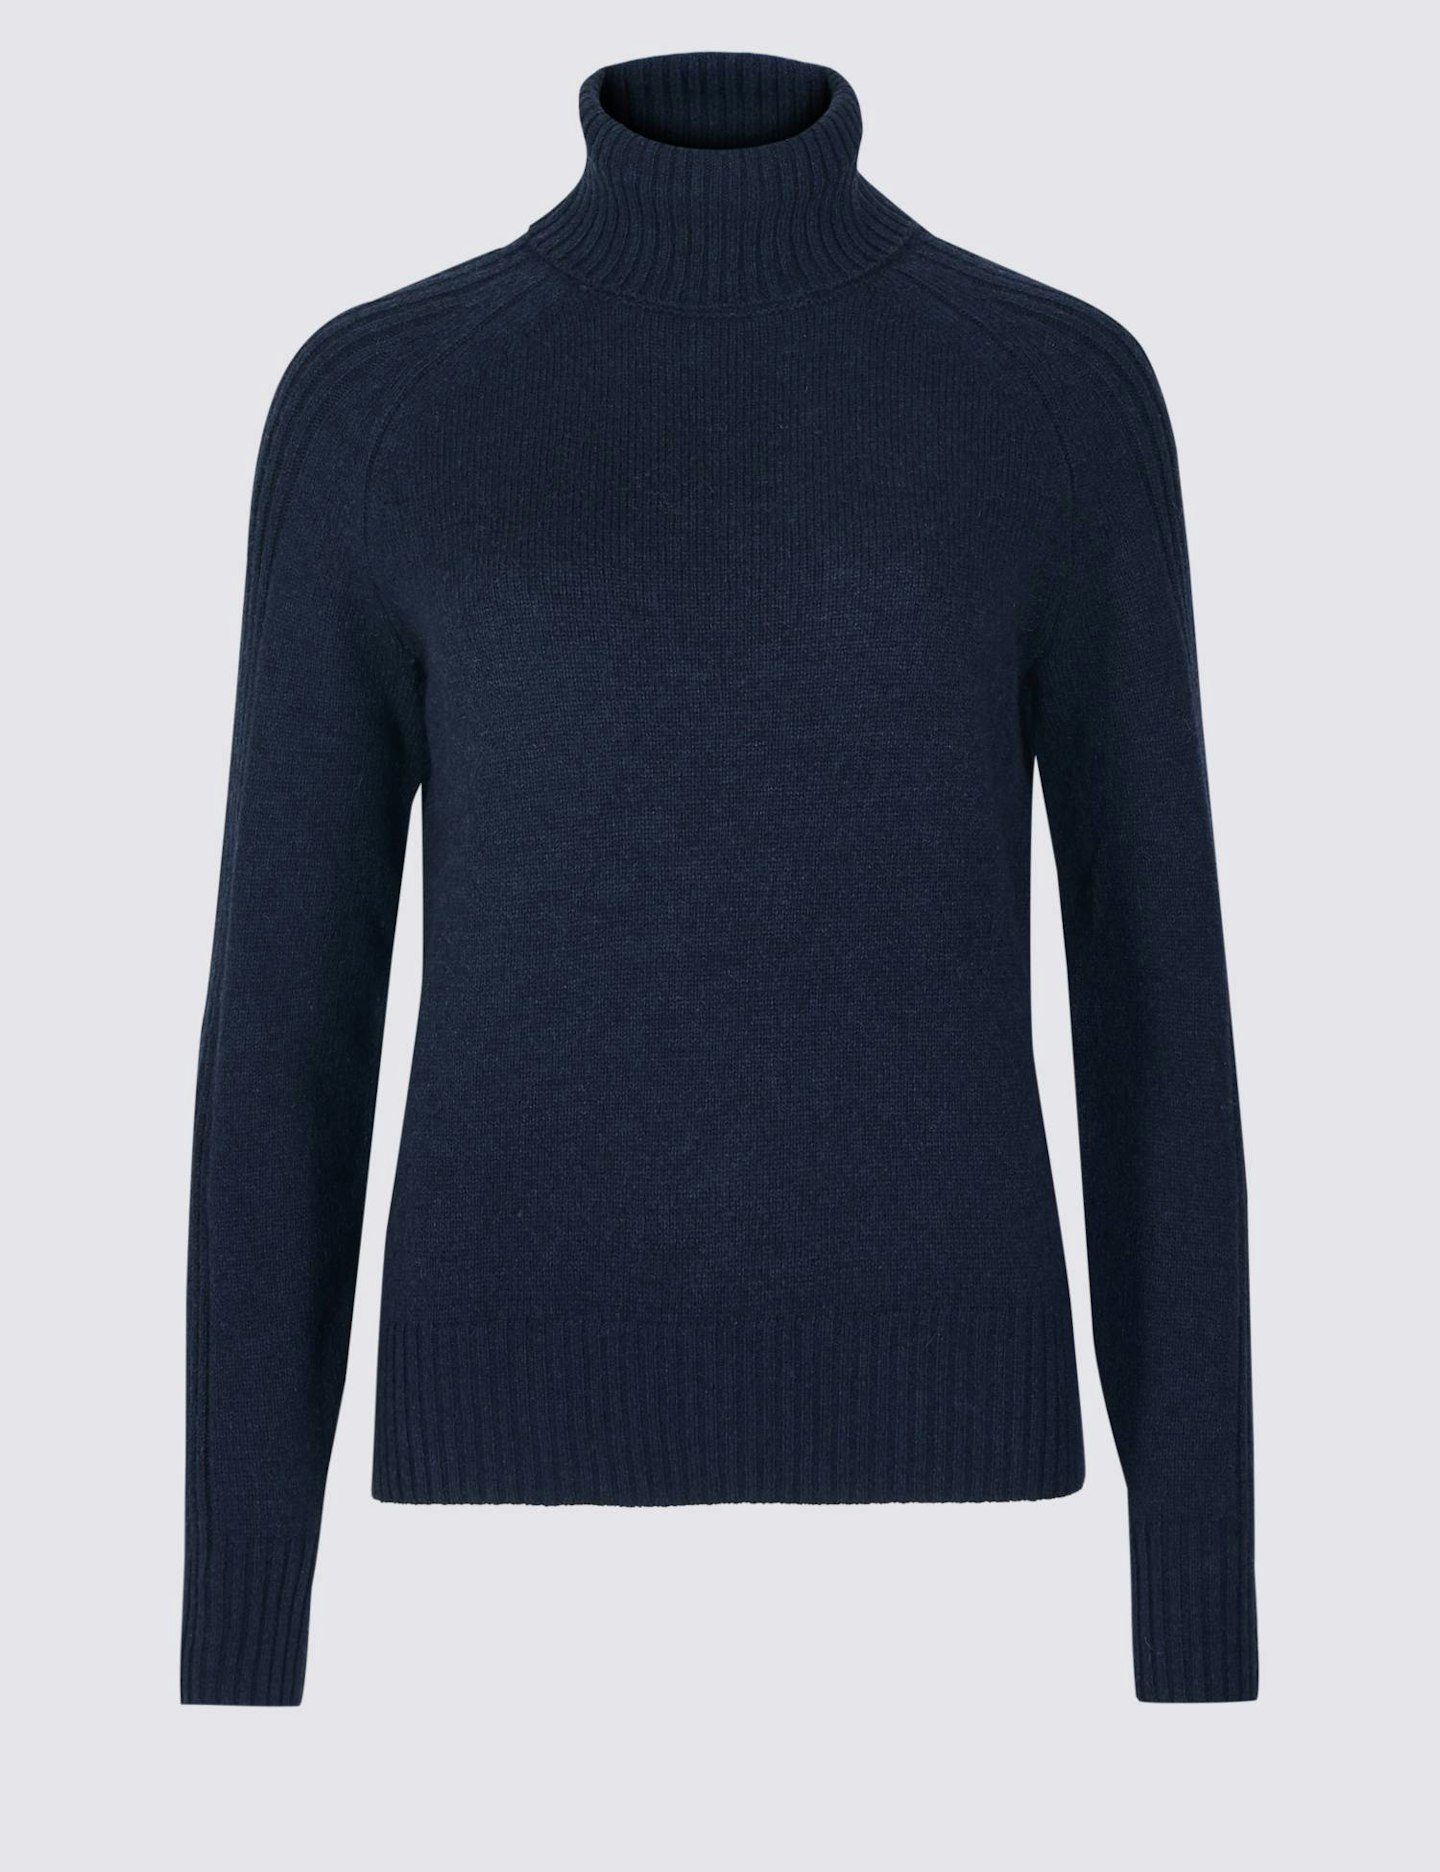 M&S Collection, Lambswool Rich Textured Roll Neck Jumper, £32.50